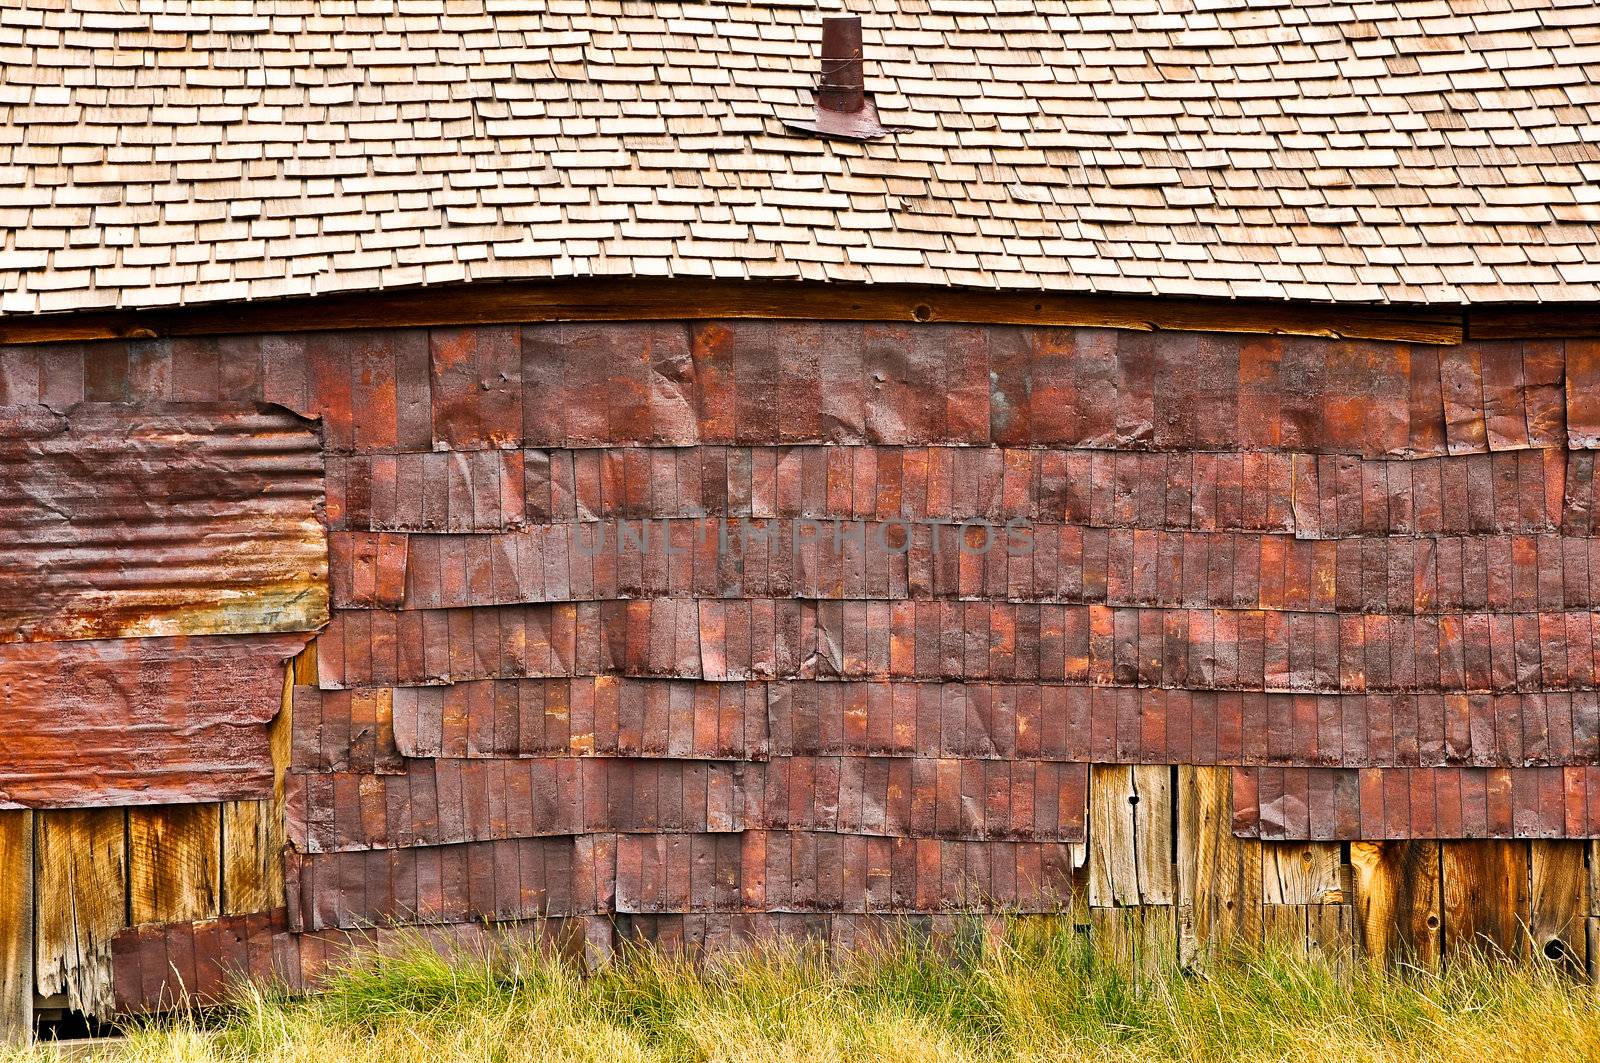 Old wooden barn detail of rusty roof and wall, Bodie village